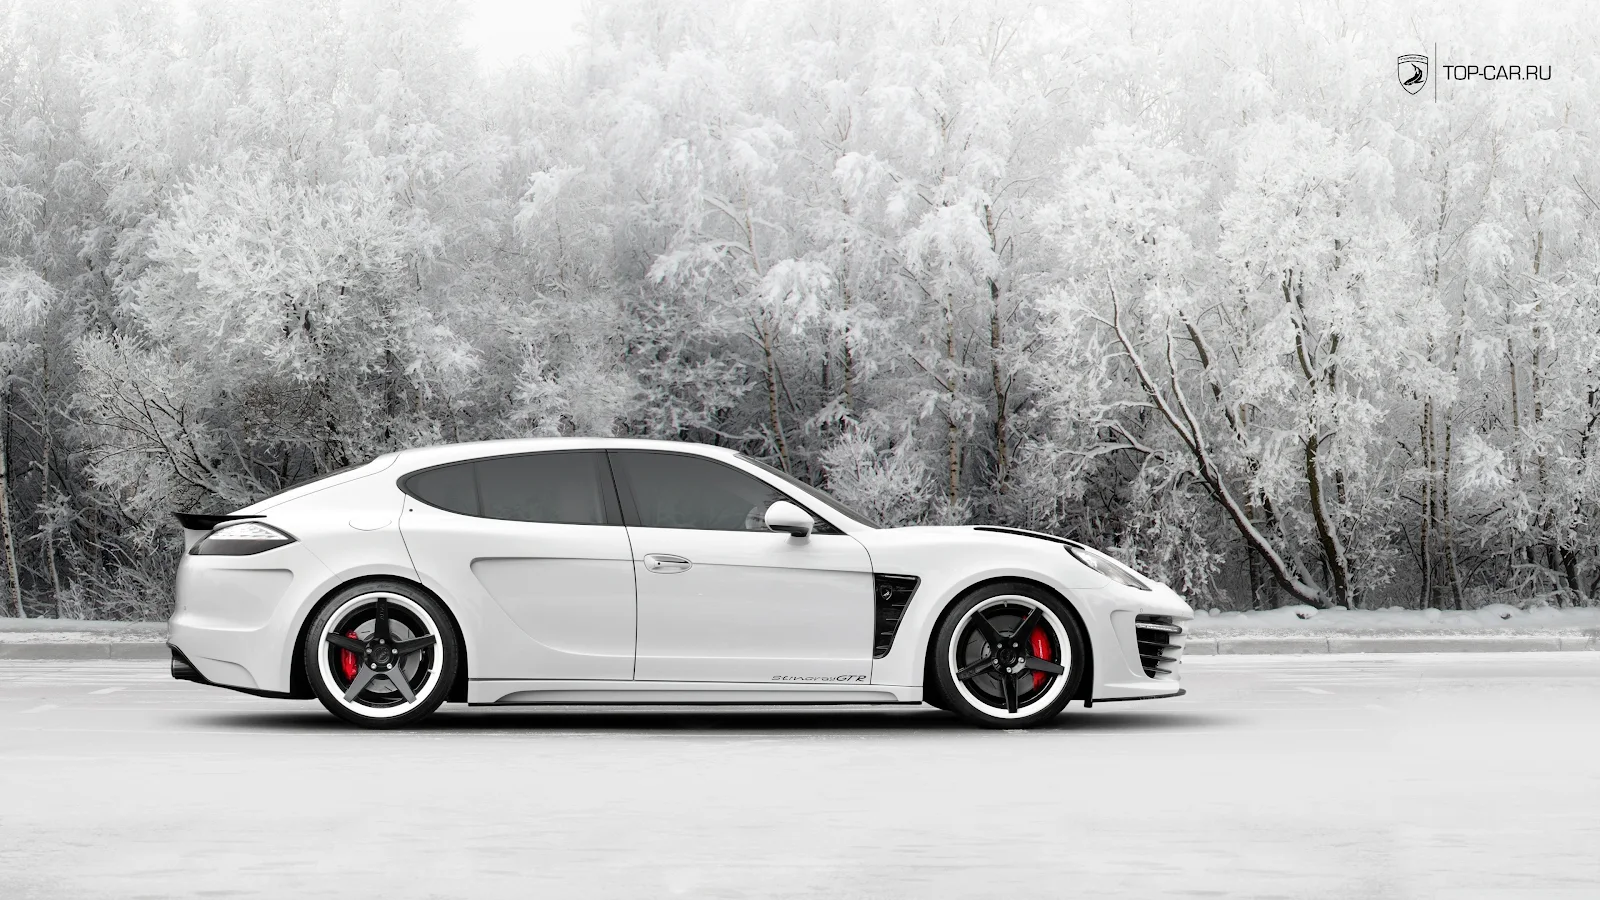 A Stunning Car, White Cars, Winter, Snow, Vehicle 4K Desktop and Mobile Wallpaper Background (3840x2160)